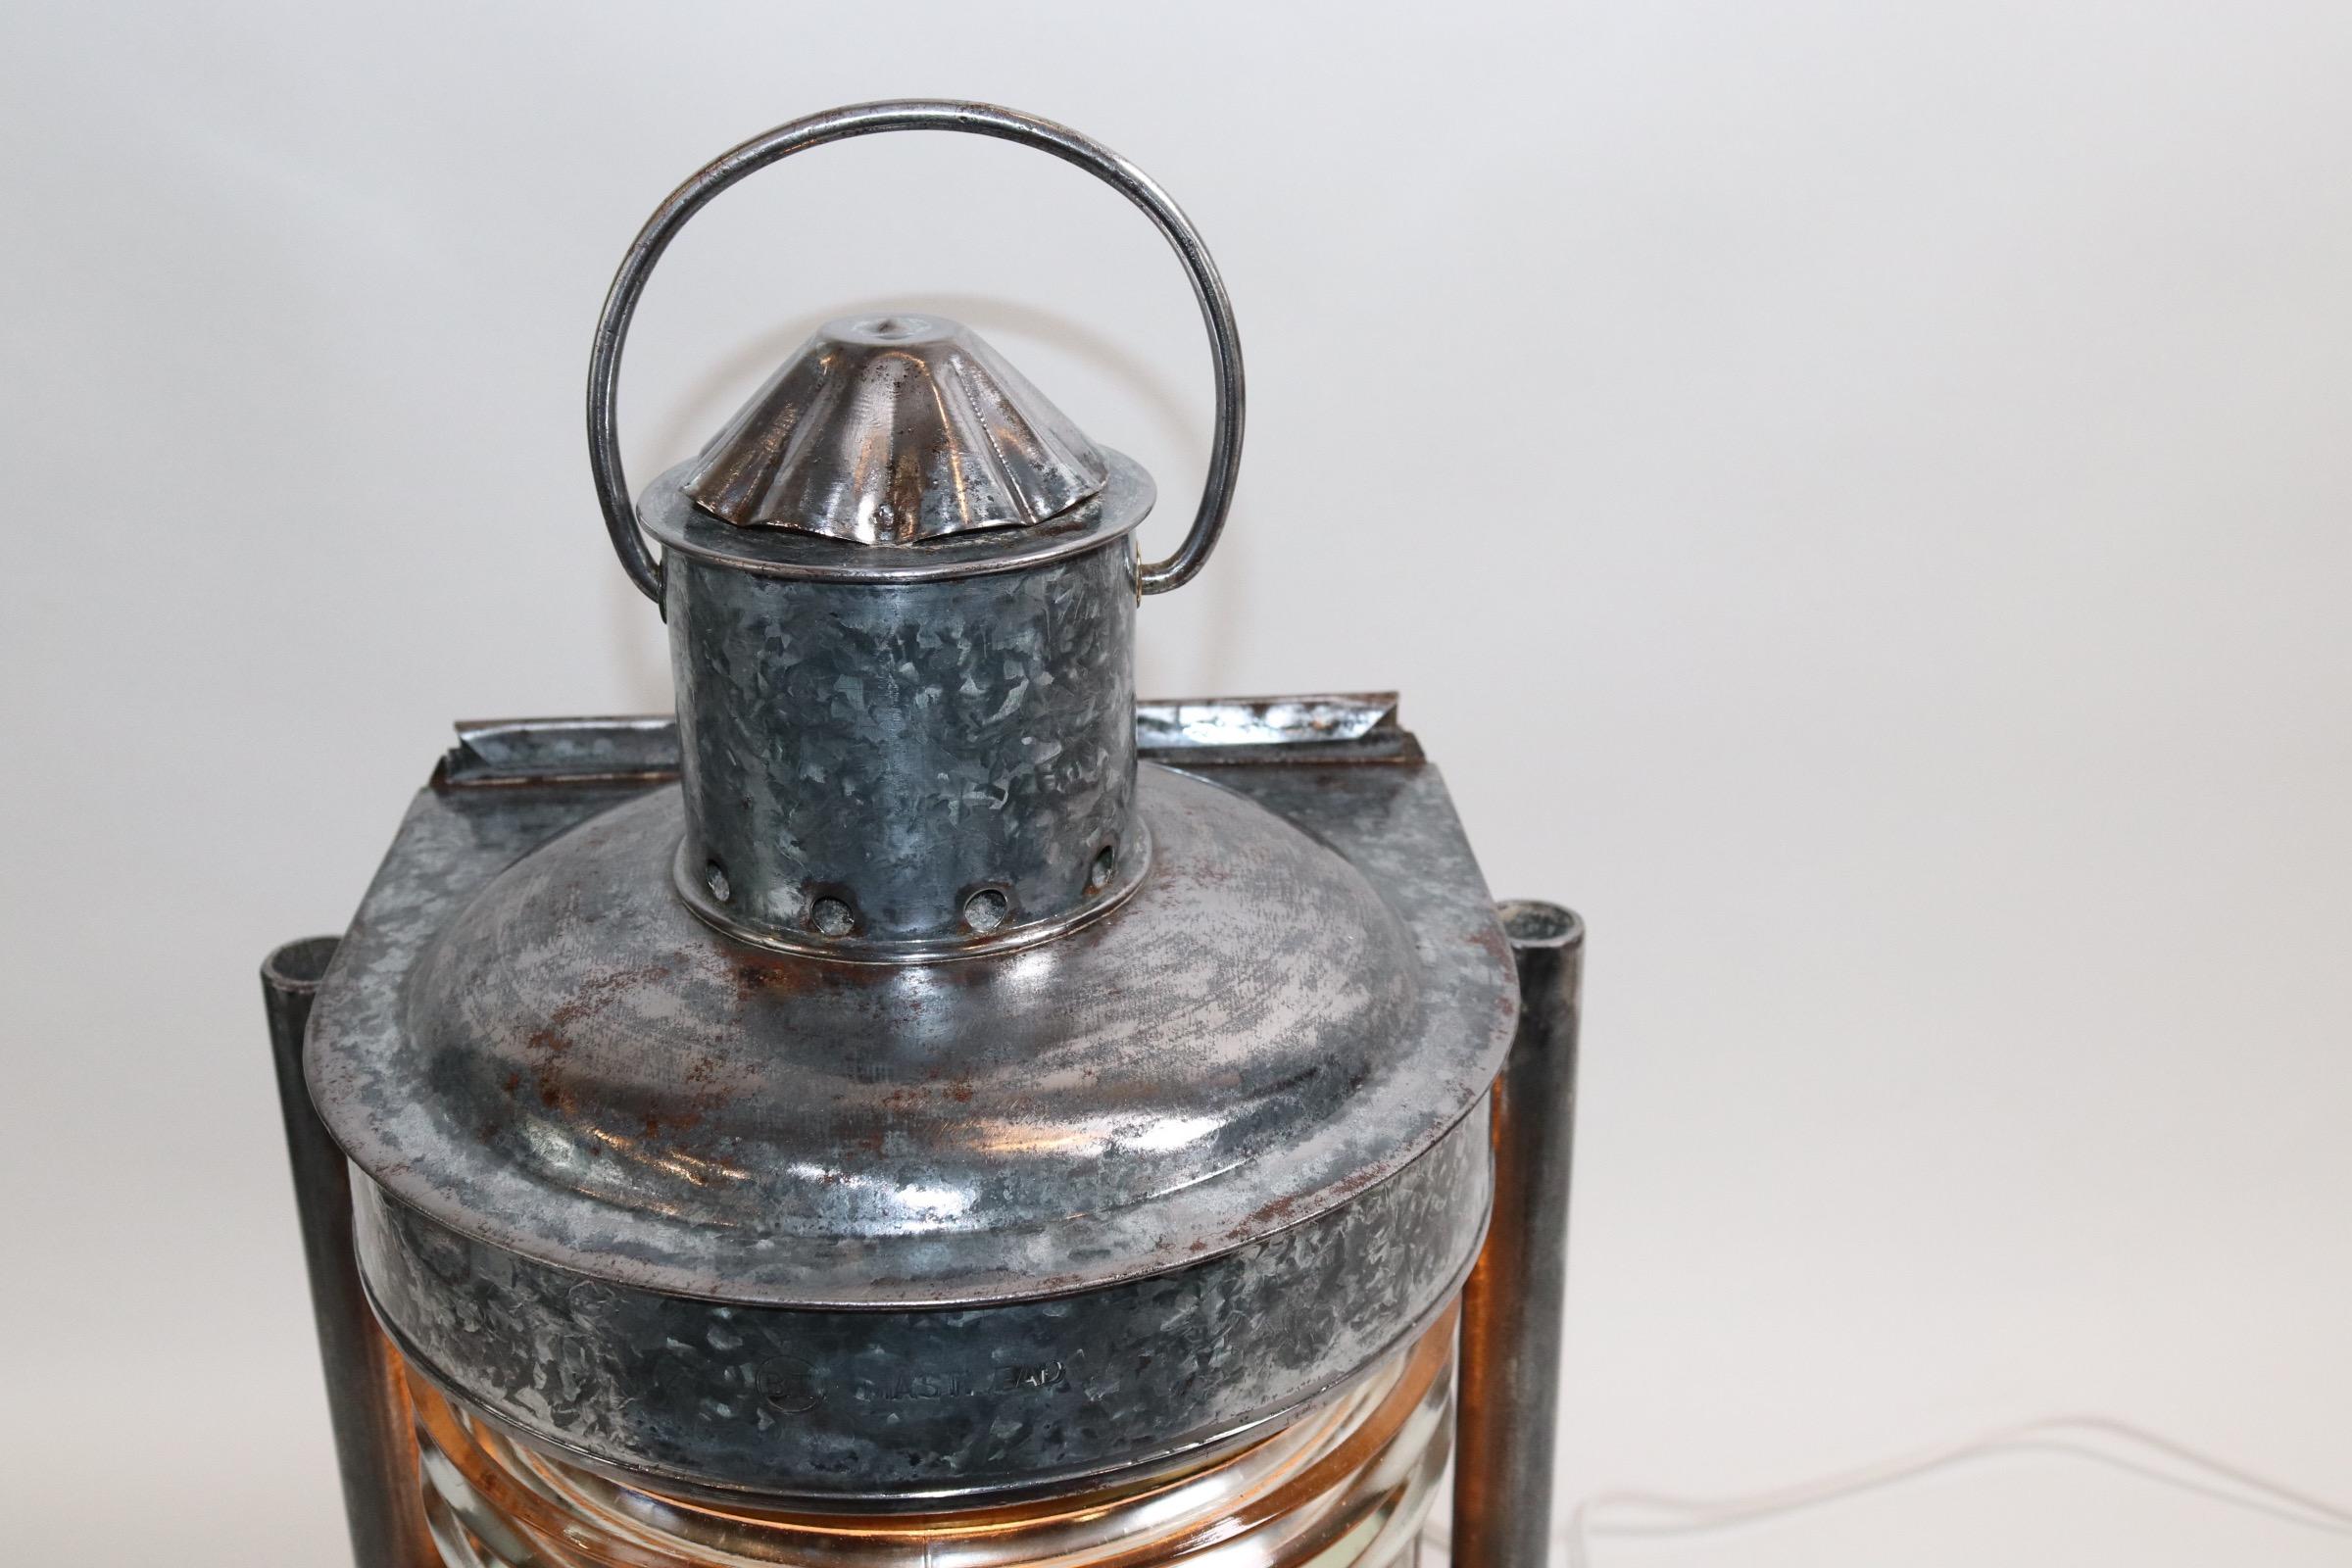 Polished steel ships masthead lantern with clear glass fresnel lens, mounting flanges, vented chimney, carry handle, mounted to a custom made wood base with rich dark finish. Lantern has been electrified for home use. Weight is 17 pounds.